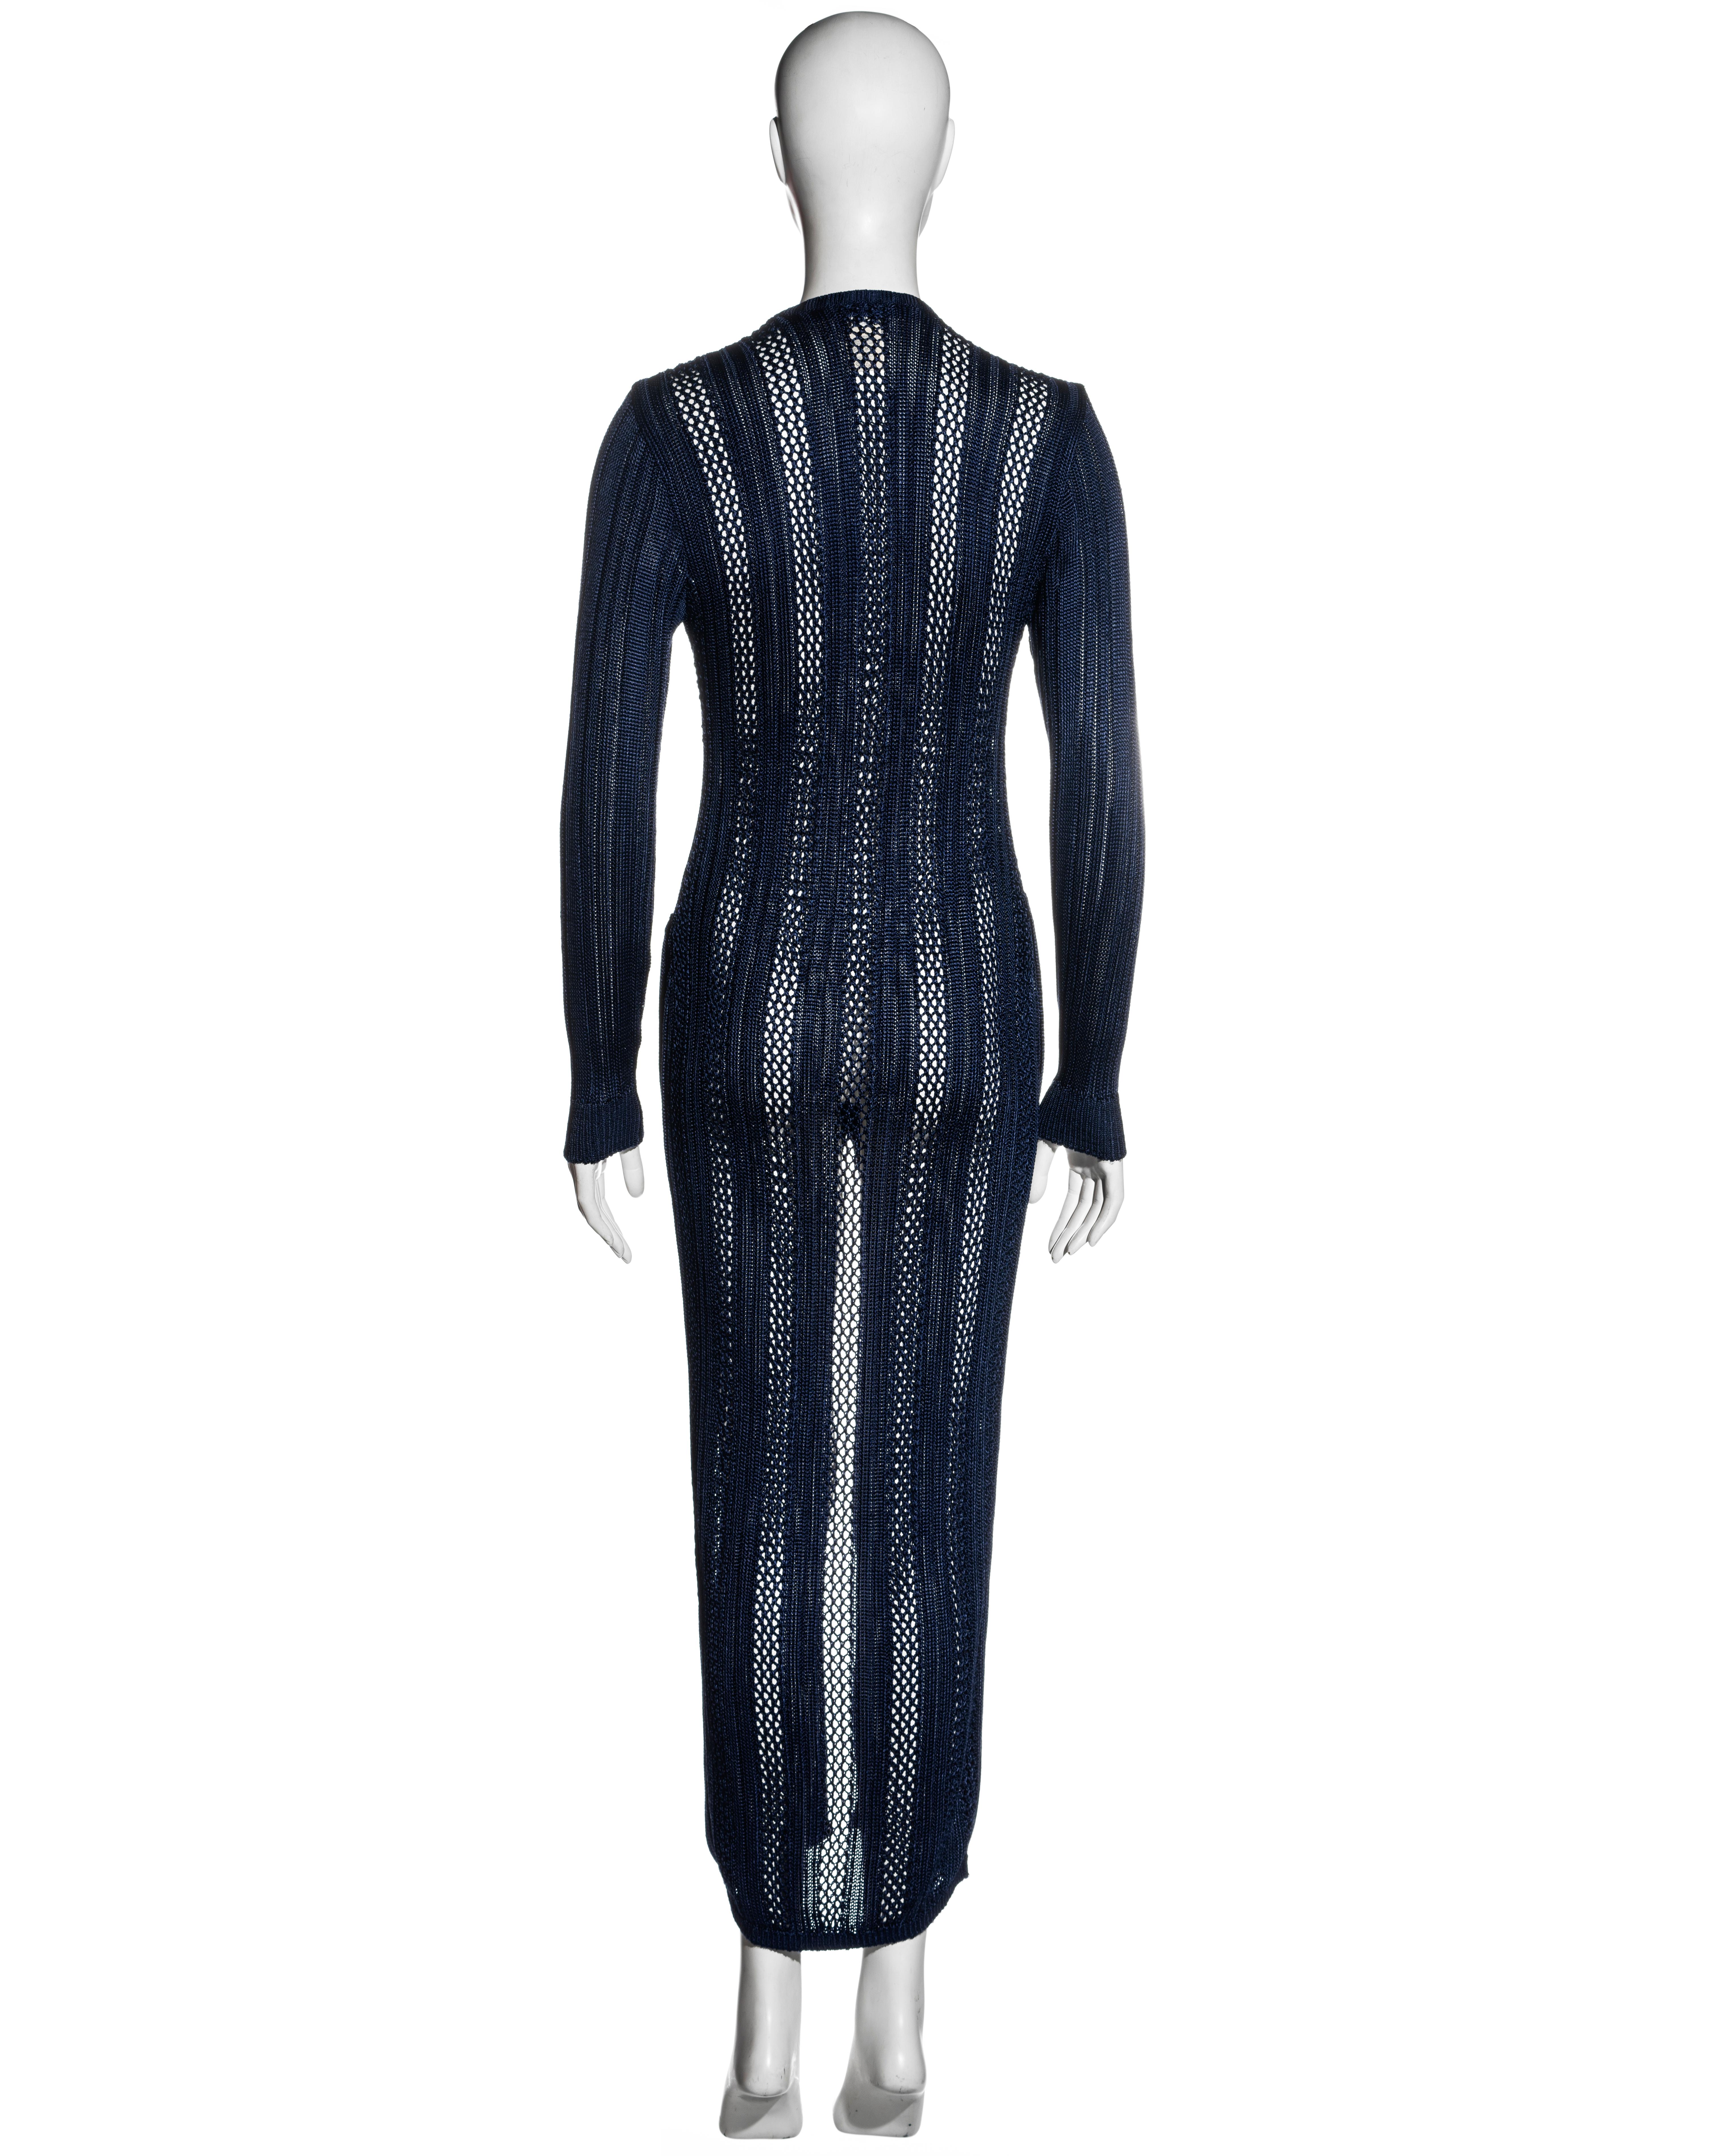 Gianni Versace navy blue open-knit bodycon dress and cardigan set, fw 1993 For Sale 7